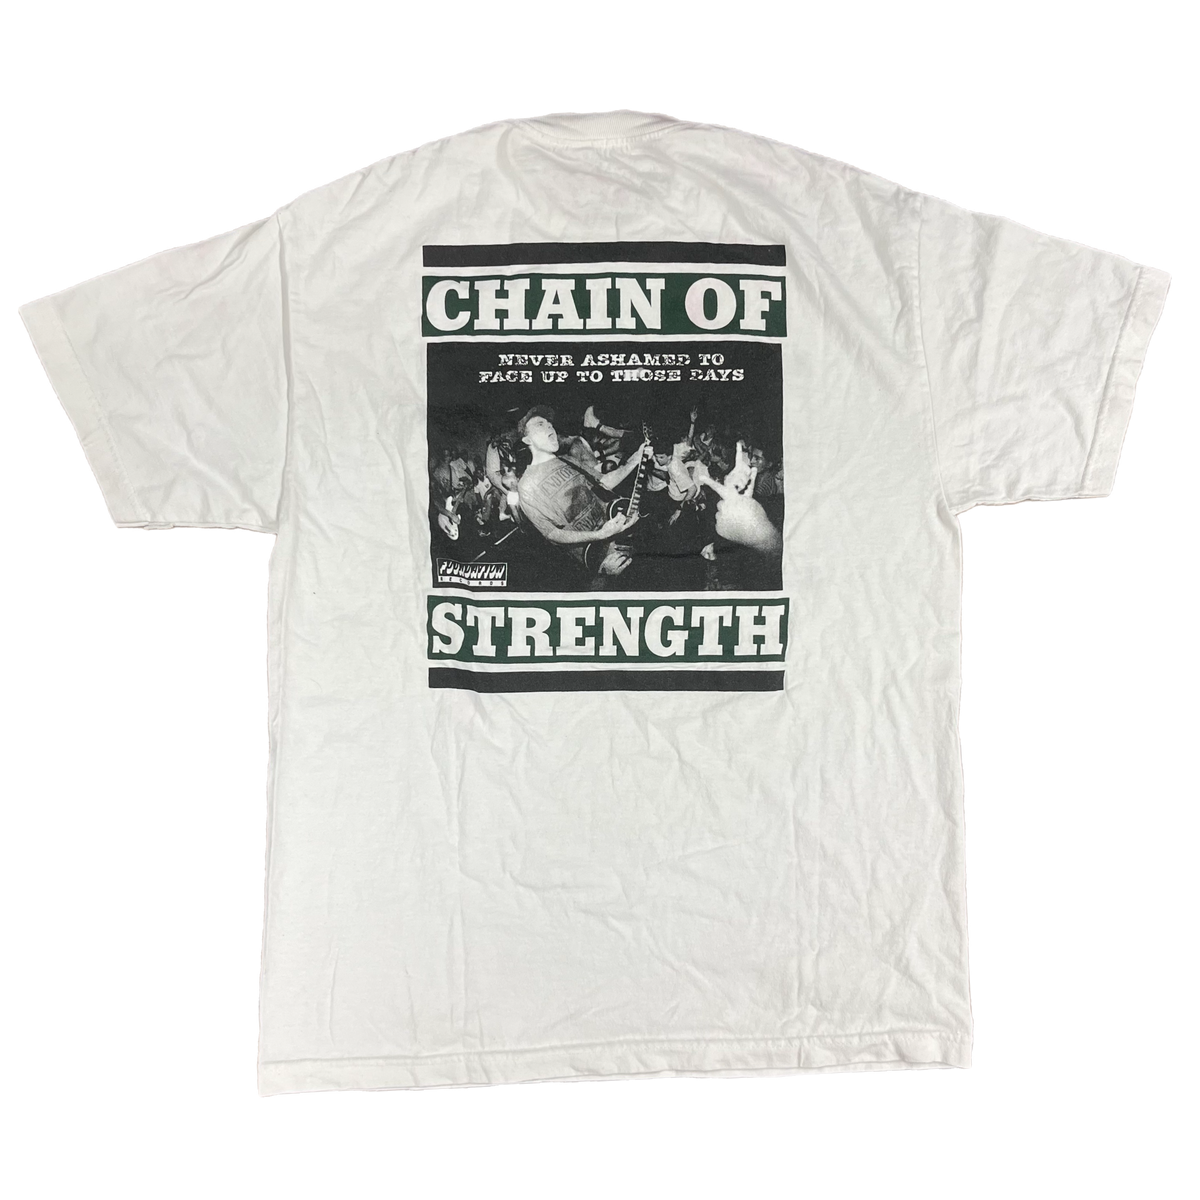 Chain Of Strength &quot;What Holds Us Apart&quot; T-Shirt